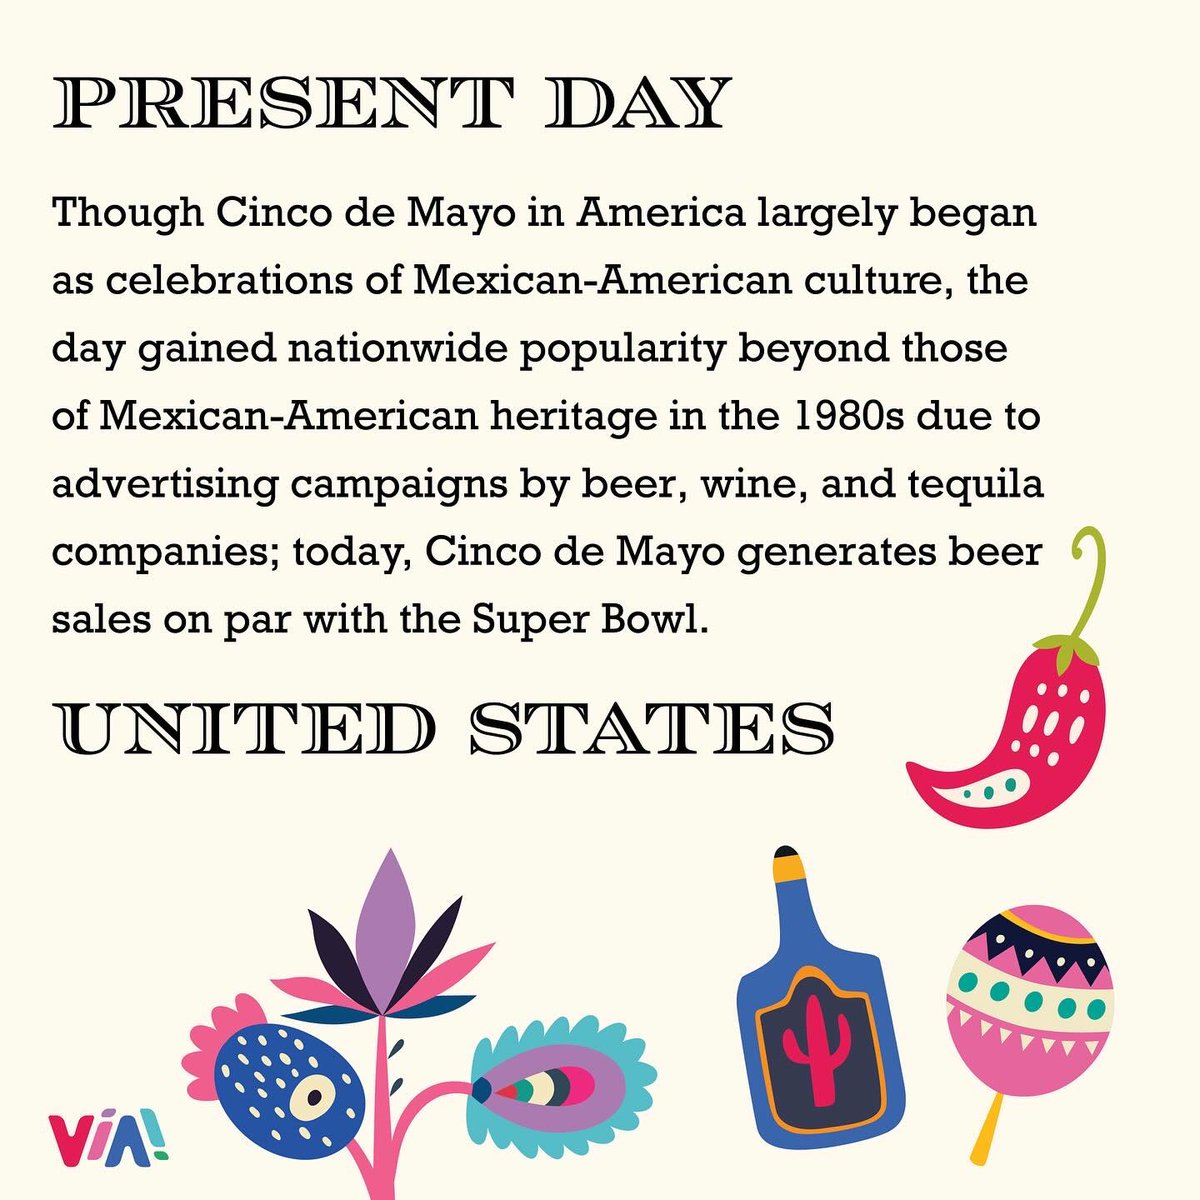 🇲🇽 From a battle won in 1862 to a celebration honoring Mexican culture. Traditions & celebrations evolve, but the spirit of resilience remains. ¡Viva México! 💃 #cincodemayo #TRIS #Biliteracy #DualLanguage #DLI #bilingualteacher #authenticeducation #lectoescritura #bilingualed